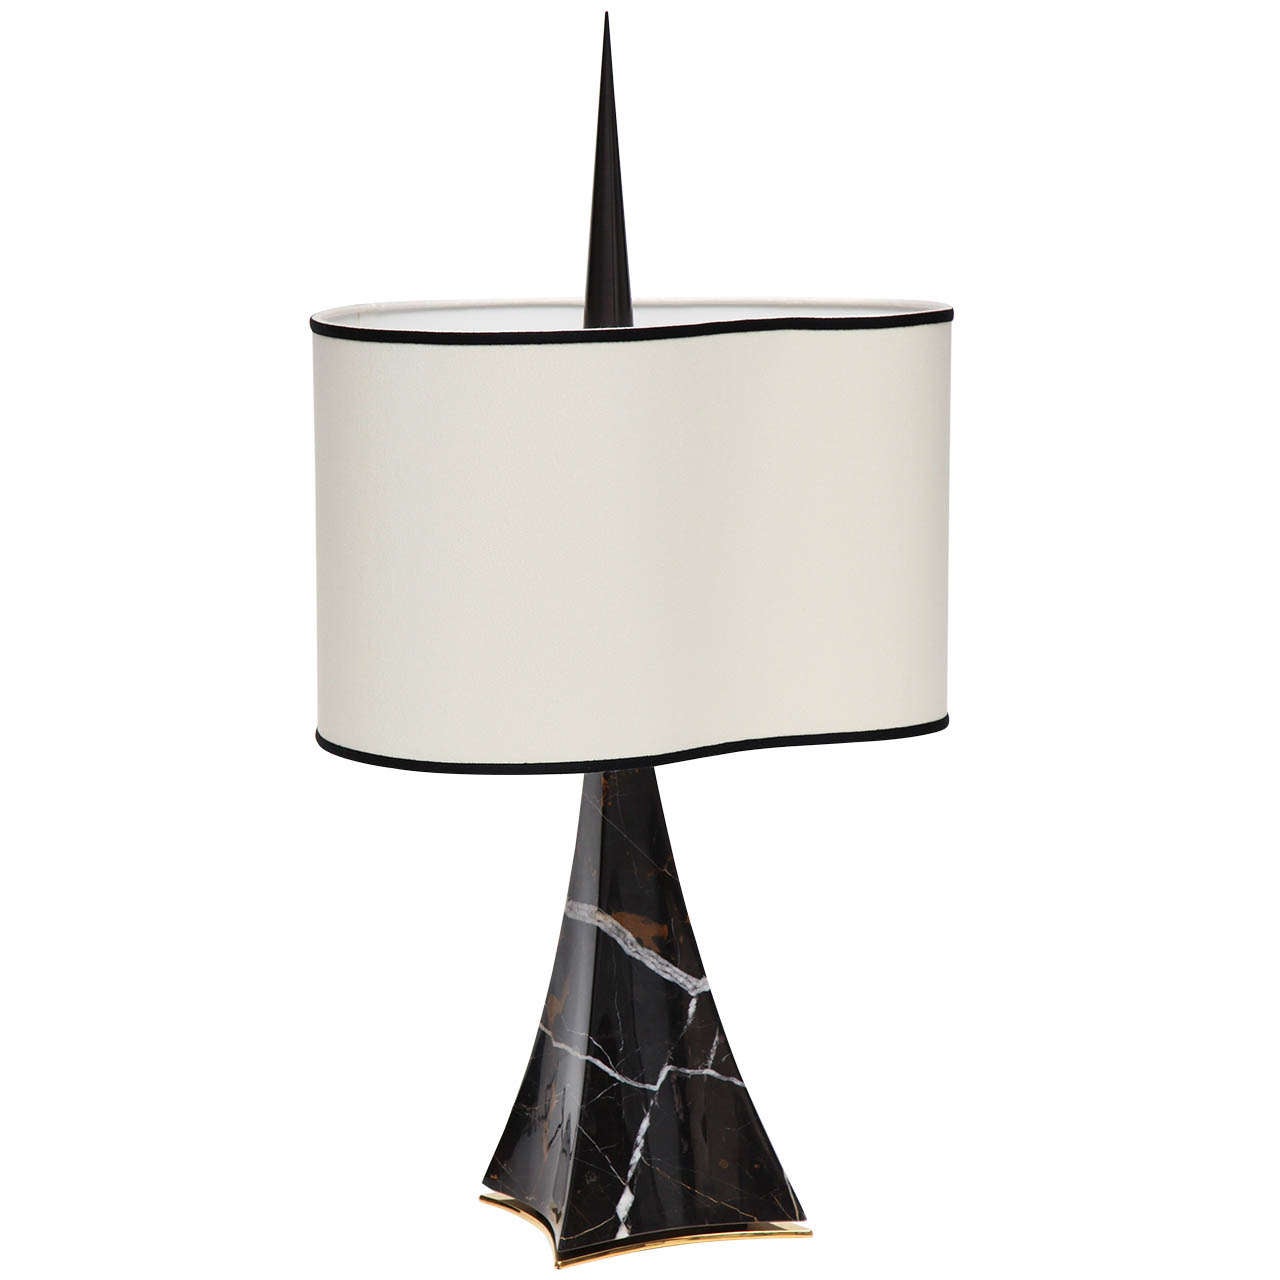 Achille Salvagni, "Olympia", Marble and Bronze Table Lamp, Italy, 2013